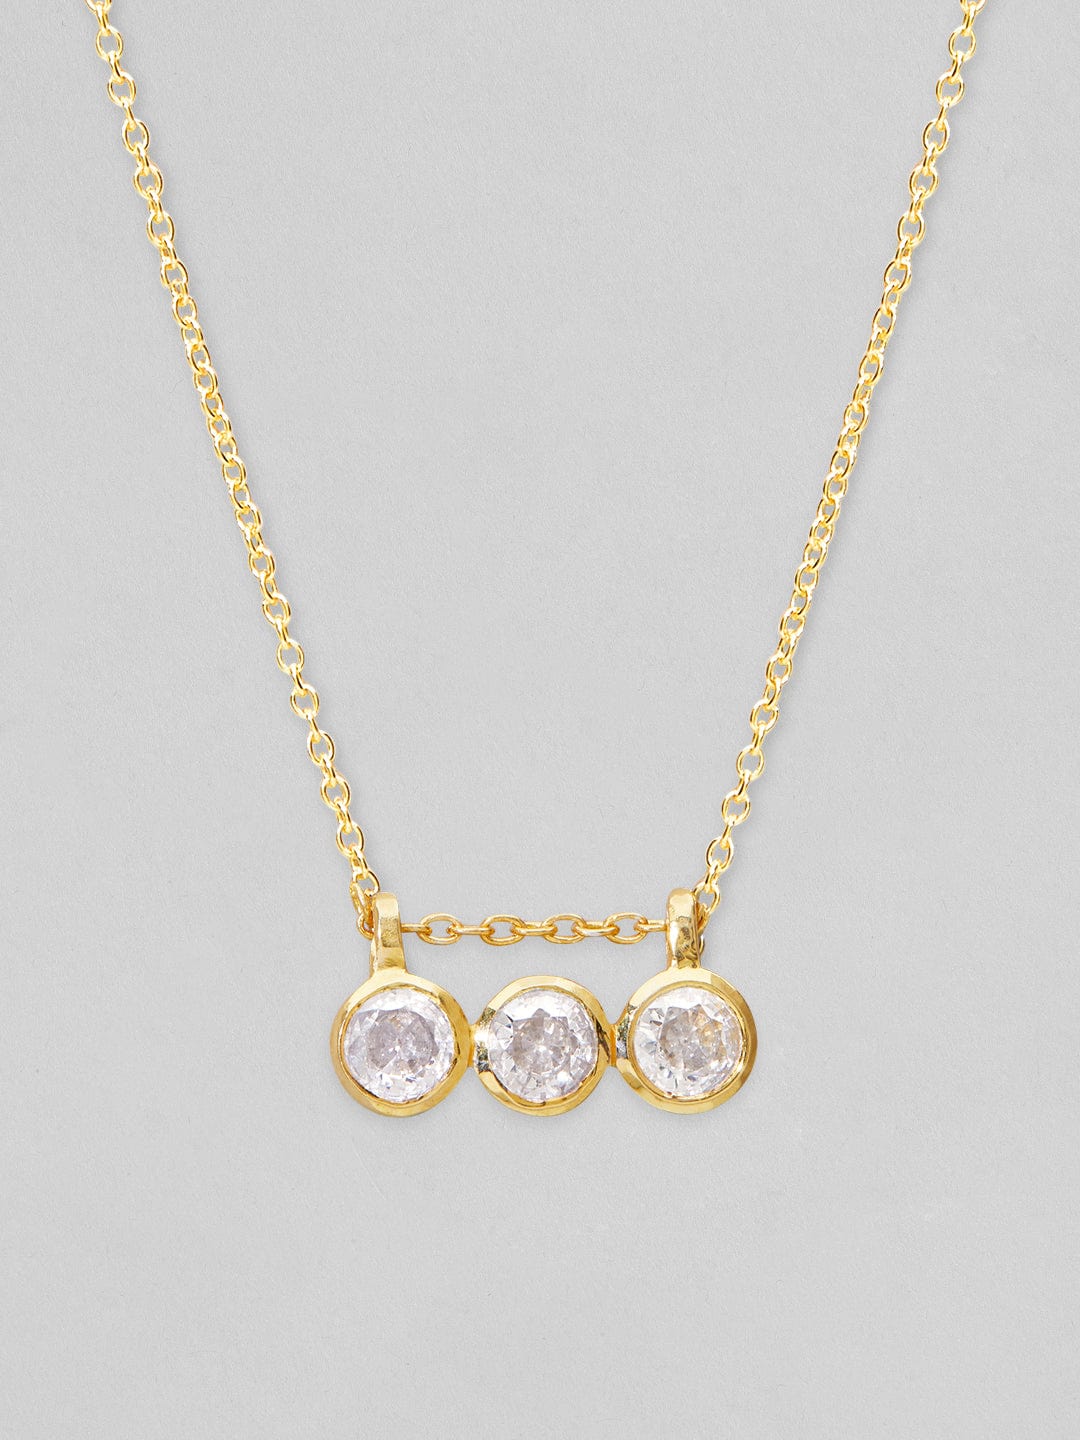 Womens 1/10 ct. tw. Diamond Three-Stone Necklace in 10K Yellow Gold |  Helzberg Signature Necklaces & Pendants — Burbujas Magicas